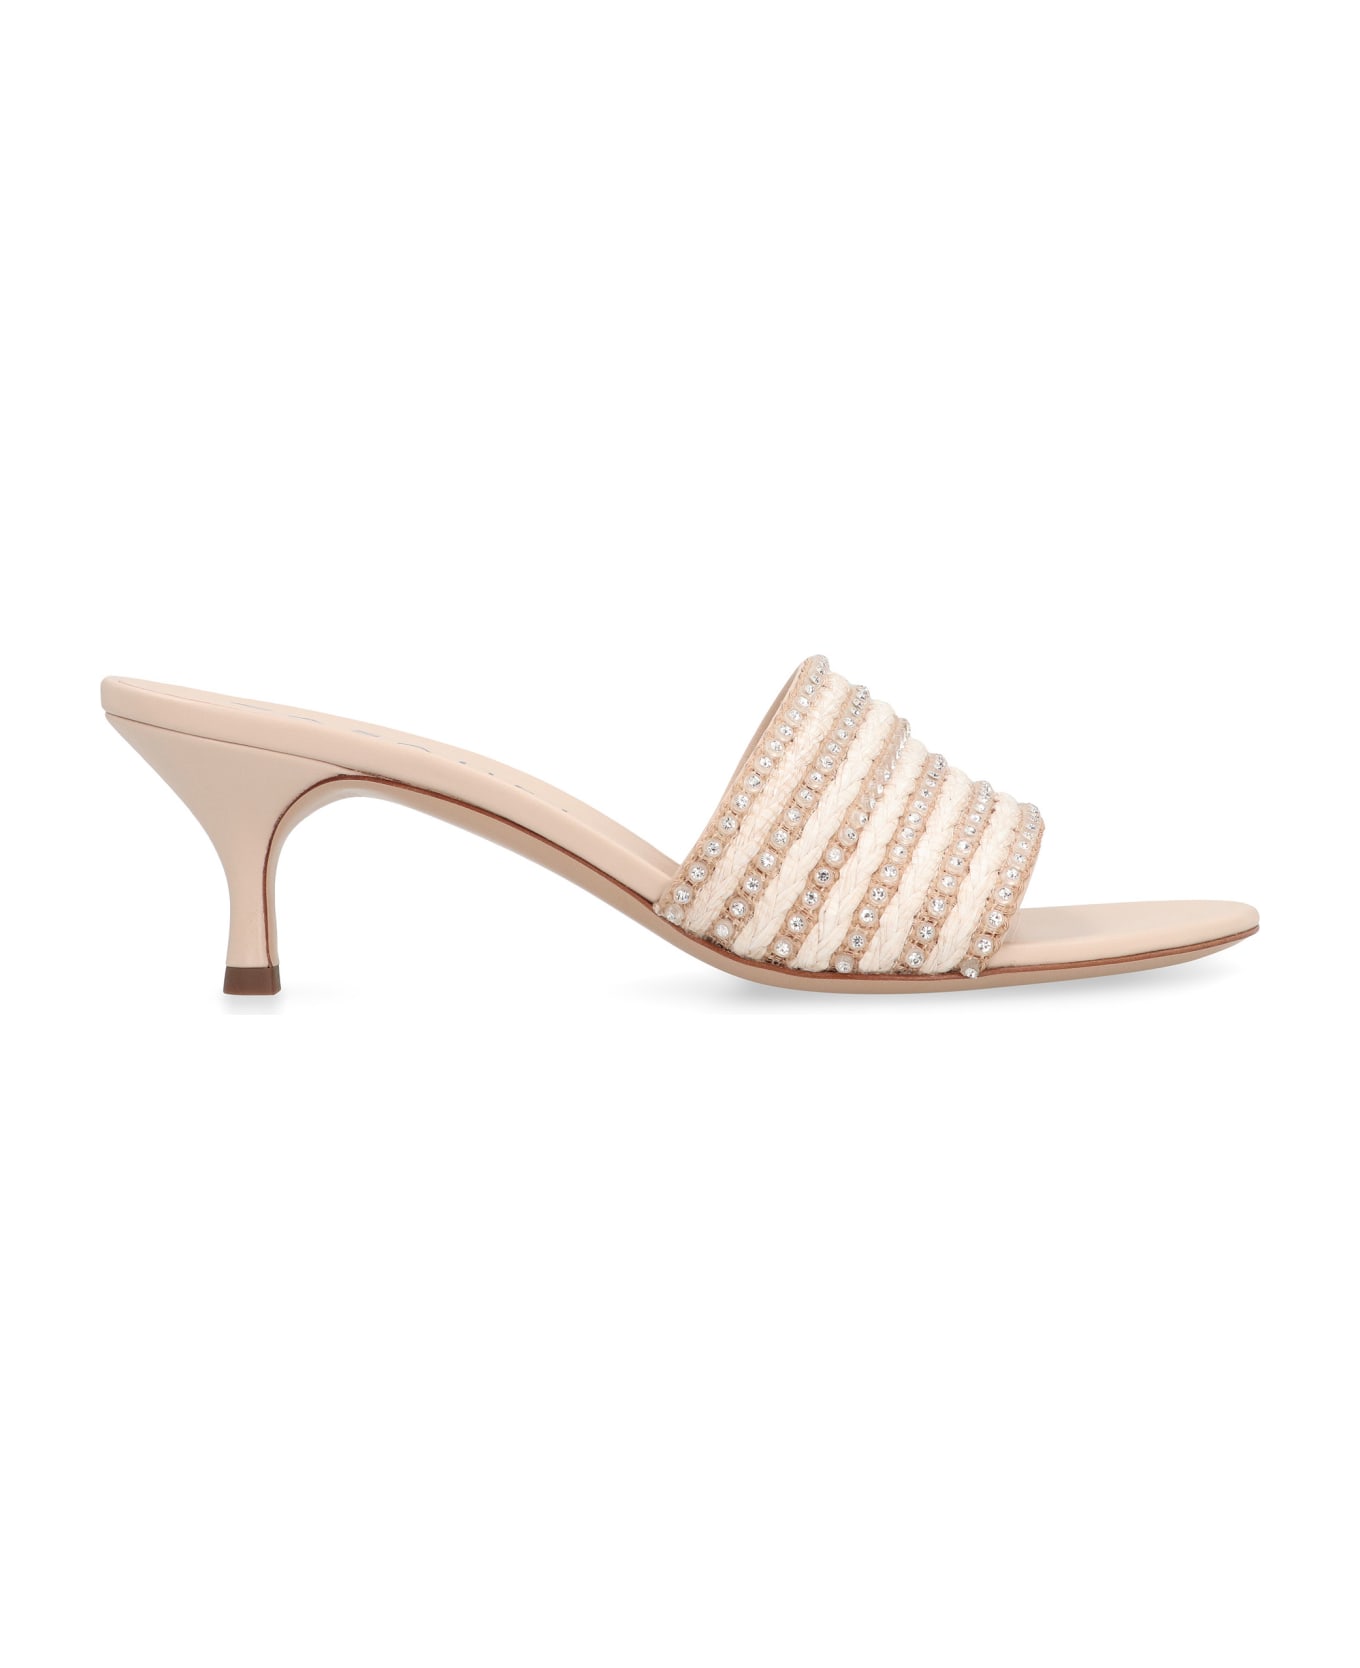 Casadei Limelight Leather Mules - Pale pink